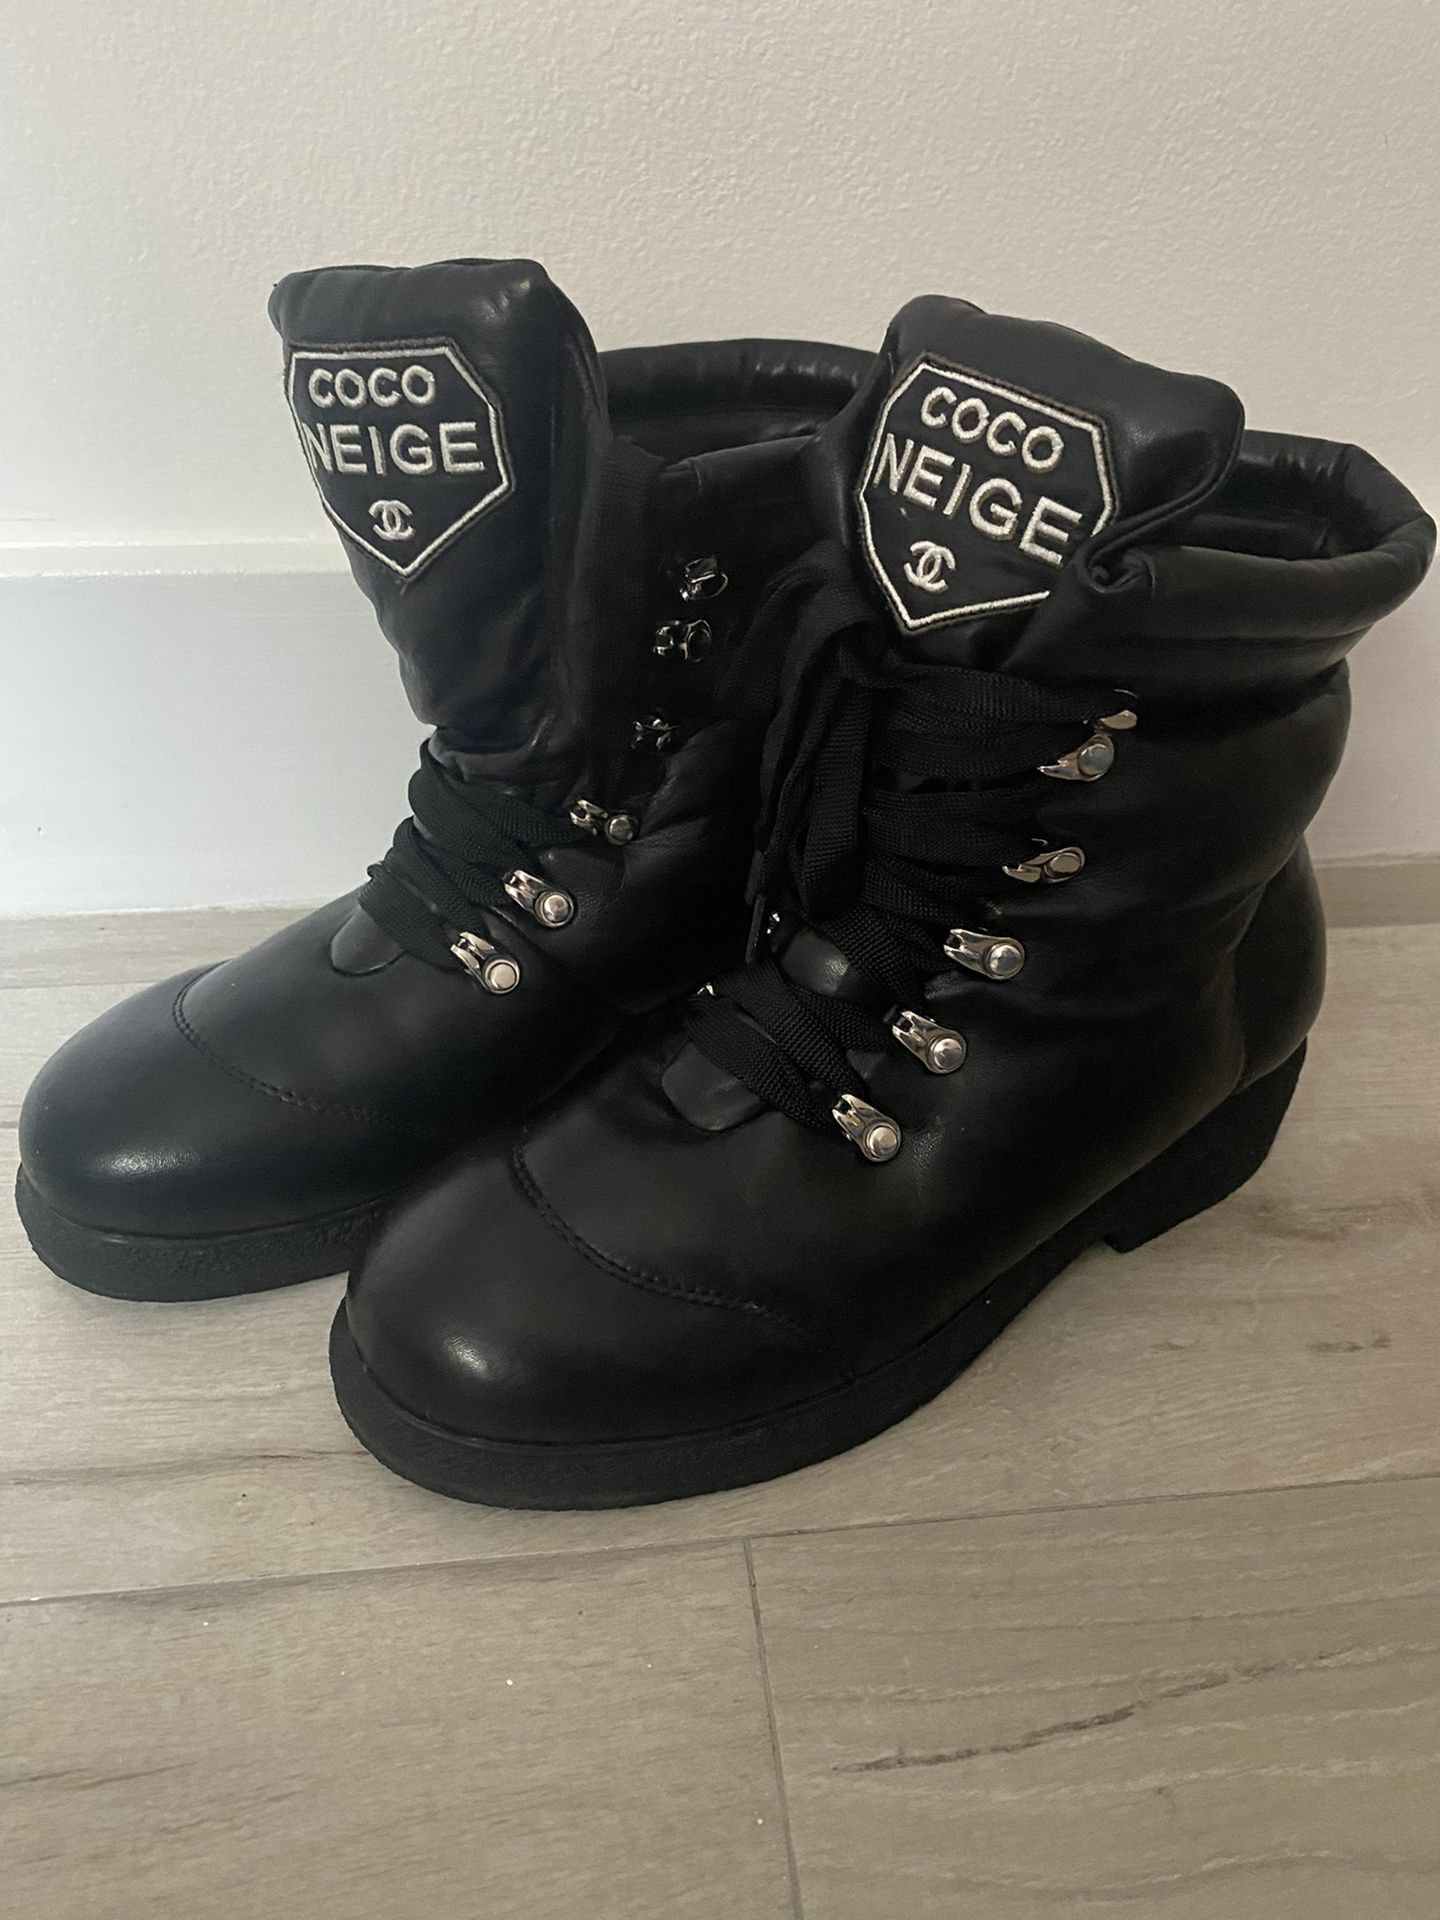 Chanel Boots Size 38 for Sale in Sunny Isles Beach, FL - OfferUp